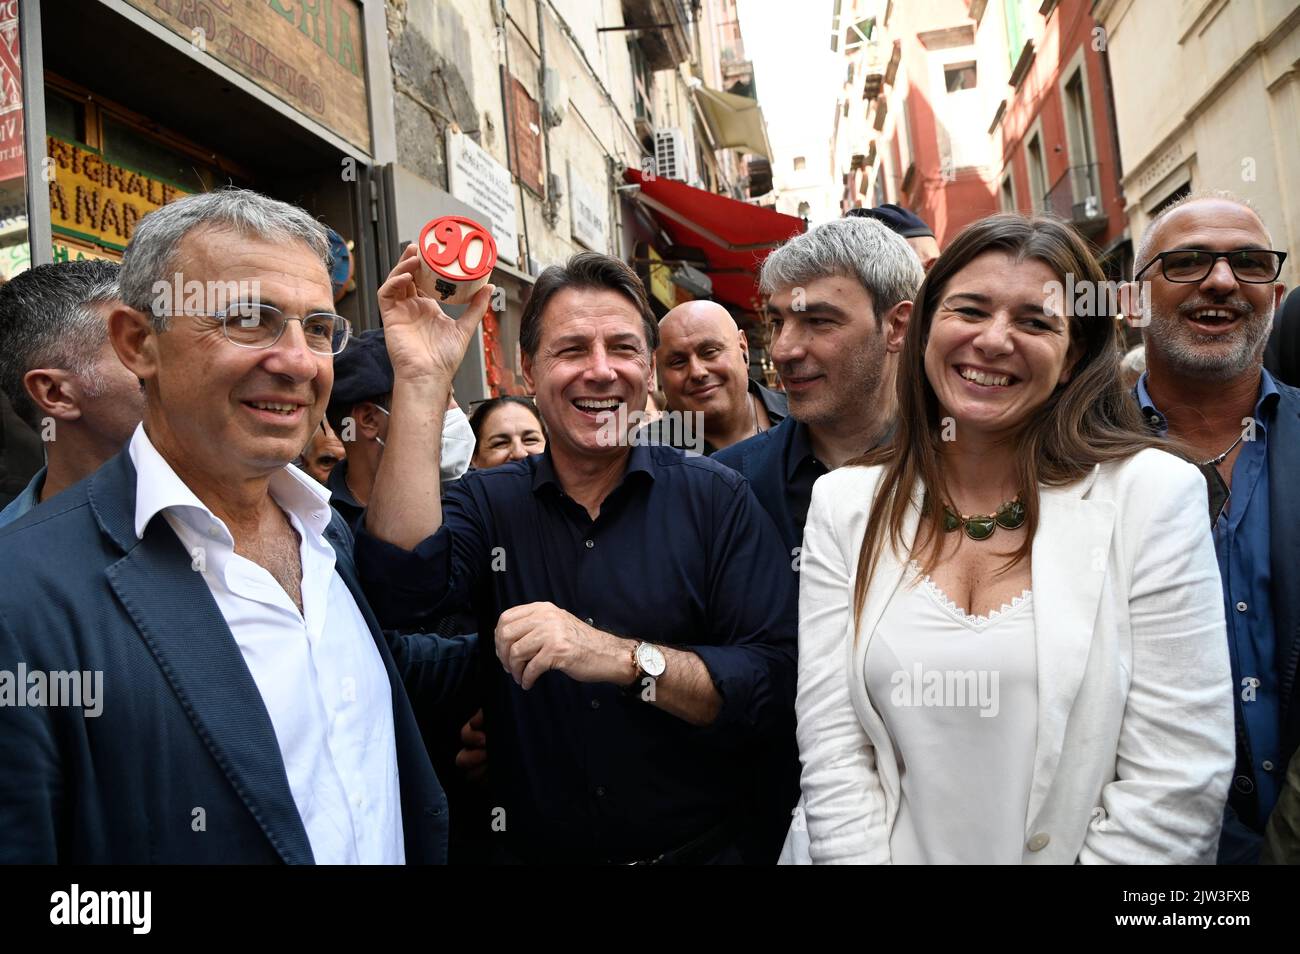 Naples, Italy. 03rd Sep, 2022. Naples, Italy. 03rd Sep, 2022. Crowd for Giuseppe Conte, who meets the local shepherd artisans and groups of people who receive citizenship income on the streets of the historic center of Naples, San Gregorio Armeno Credit: Independent Photo Agency/Alamy Live News Credit: Independent Photo Agency Srl/Alamy Live News Stock Photo